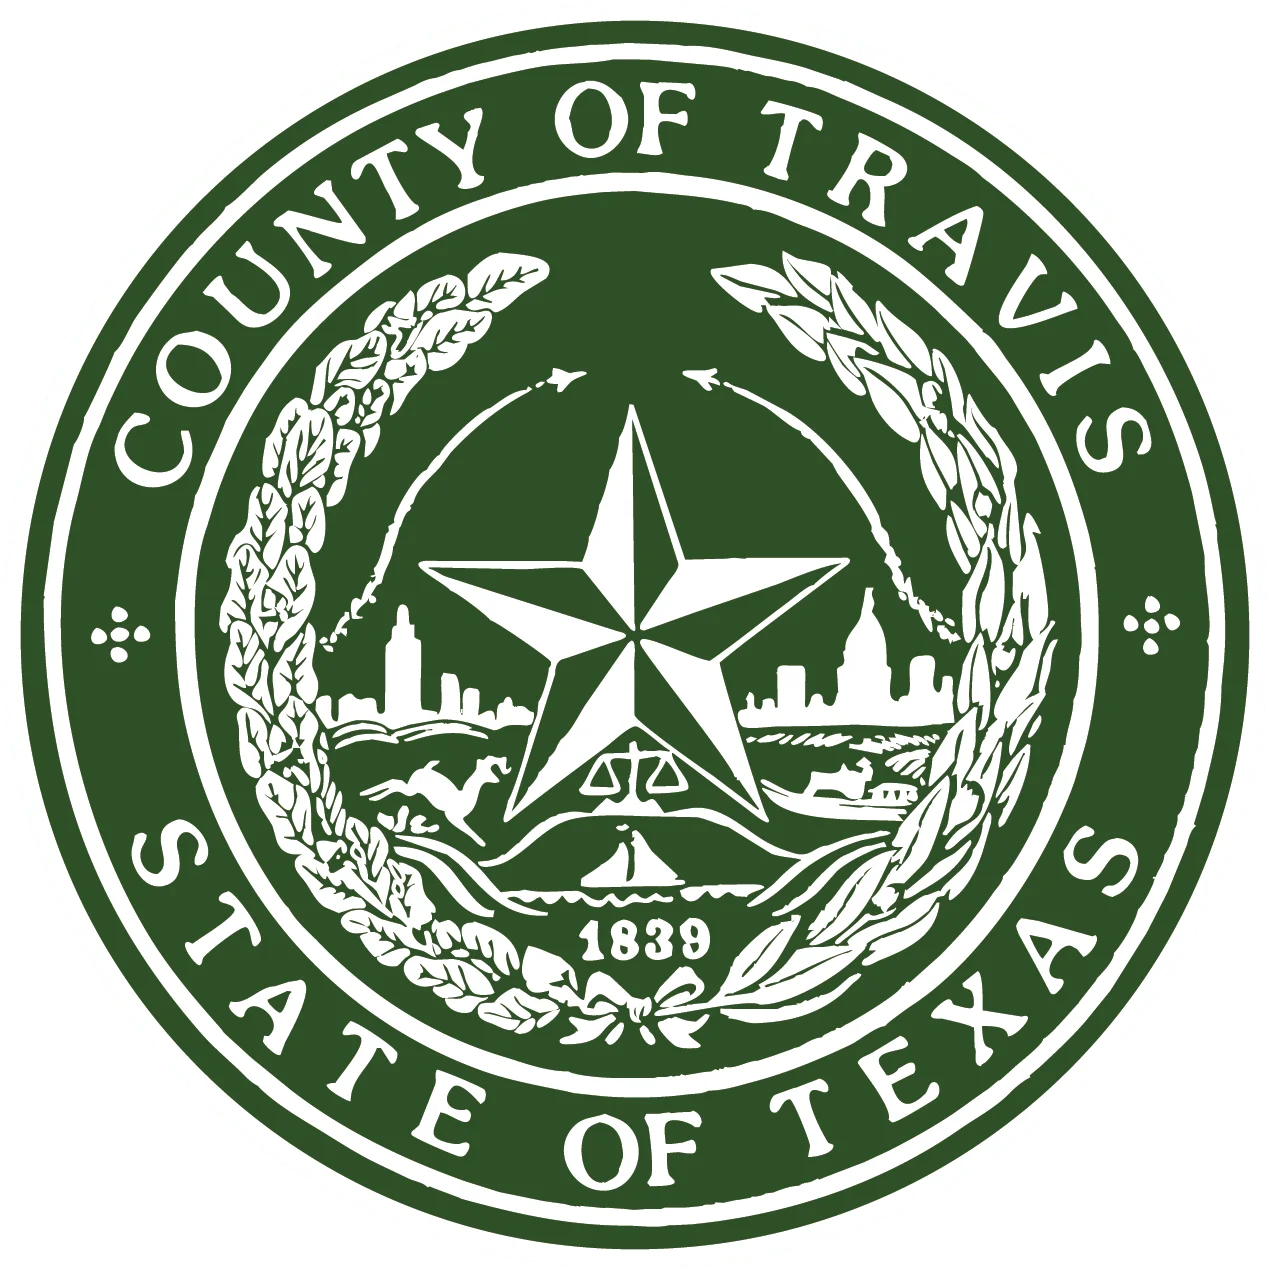 County of Travis